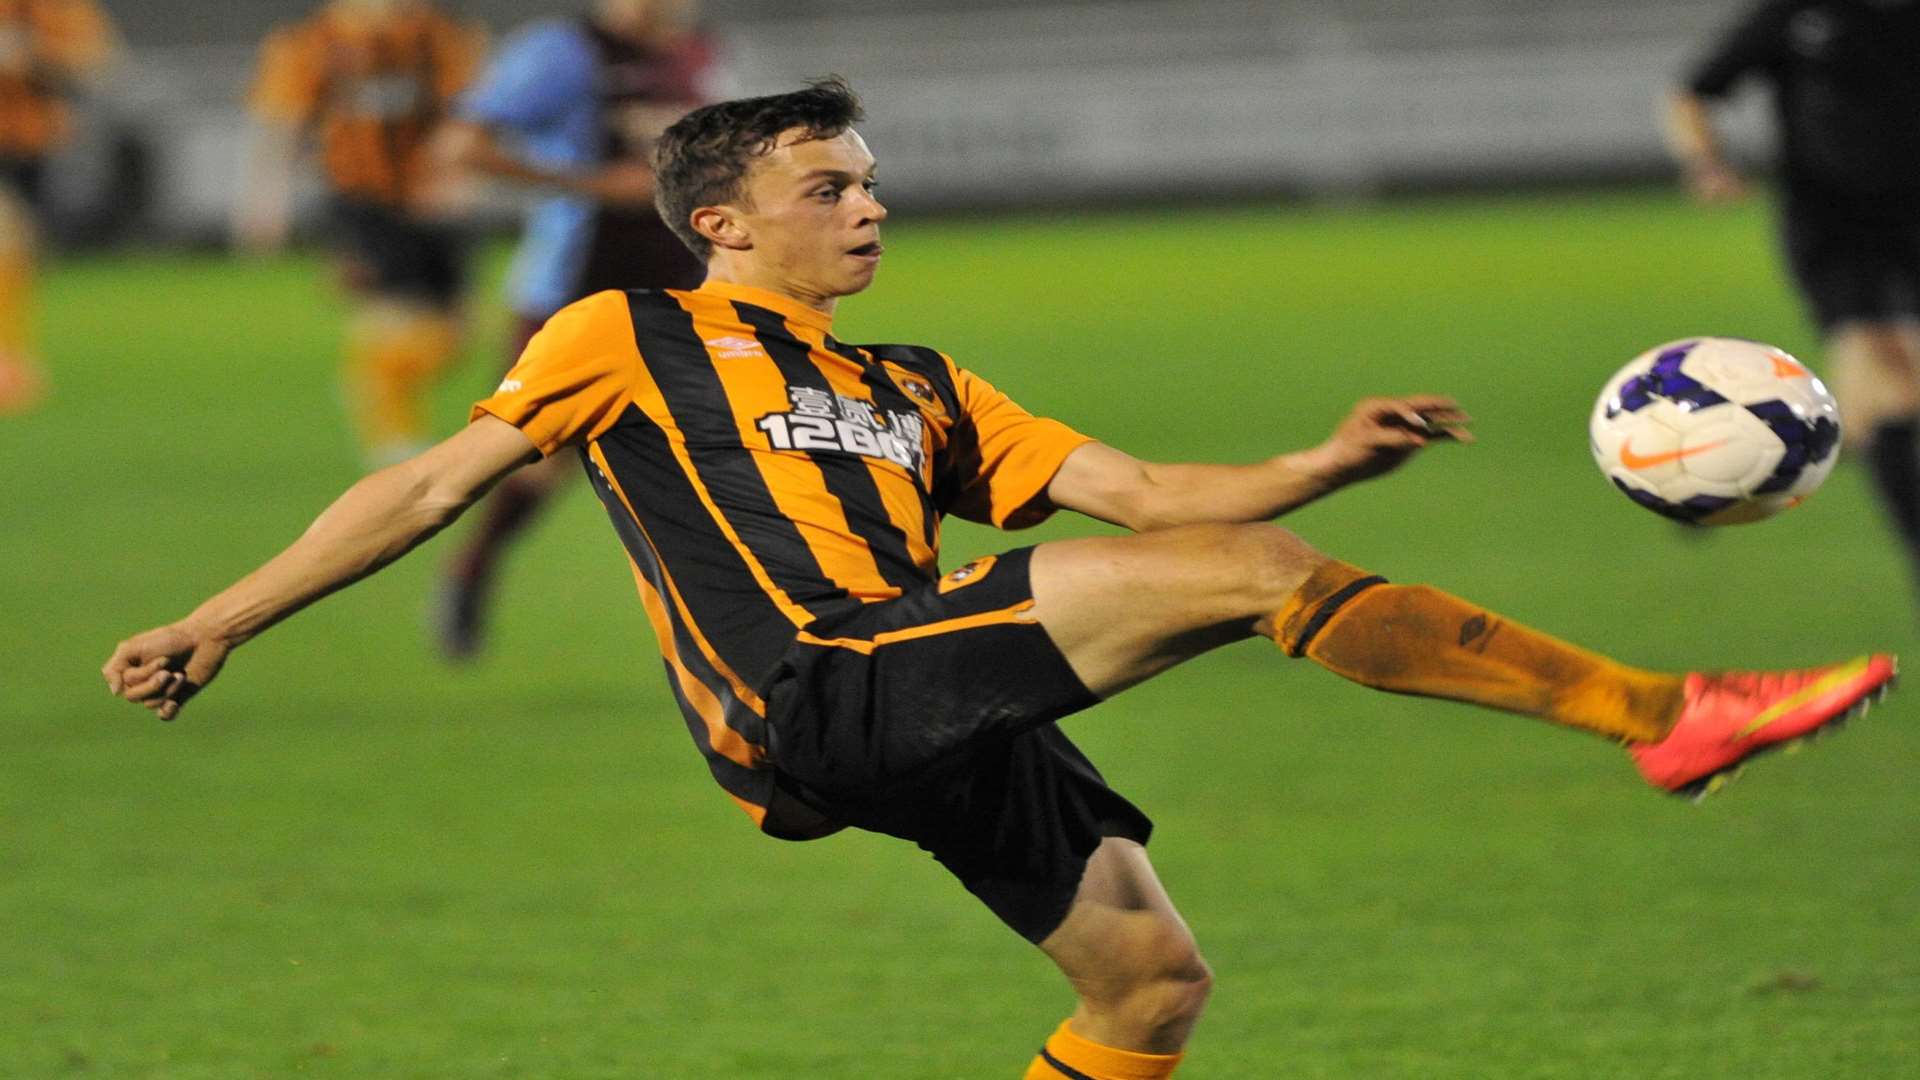 Hull's Johan ter Horst helps the ball on with his right foot